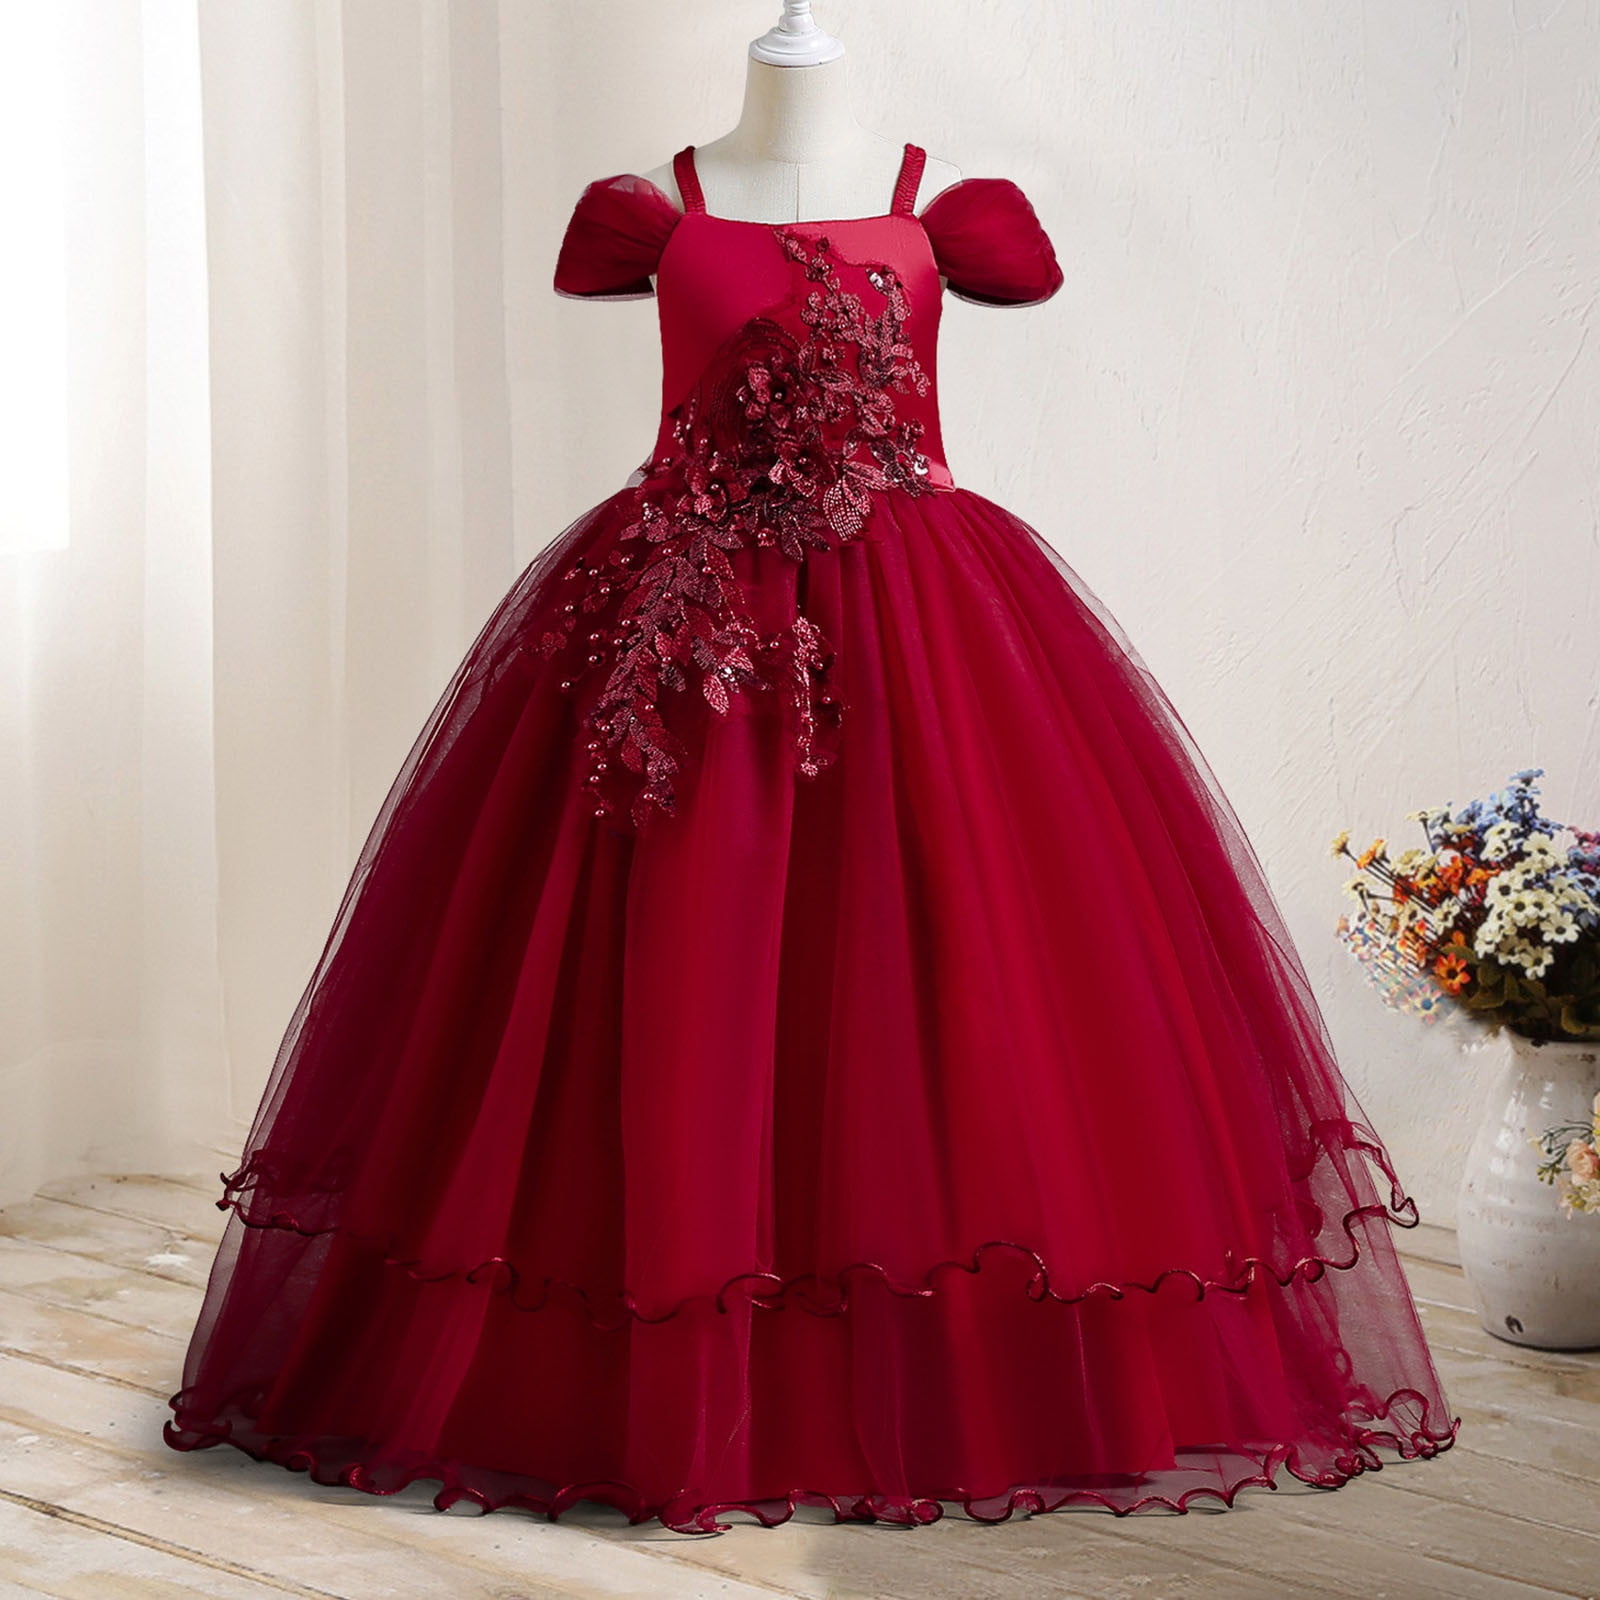 All Dresses ➤ Milla Dresses - USA, Worldwide delivery